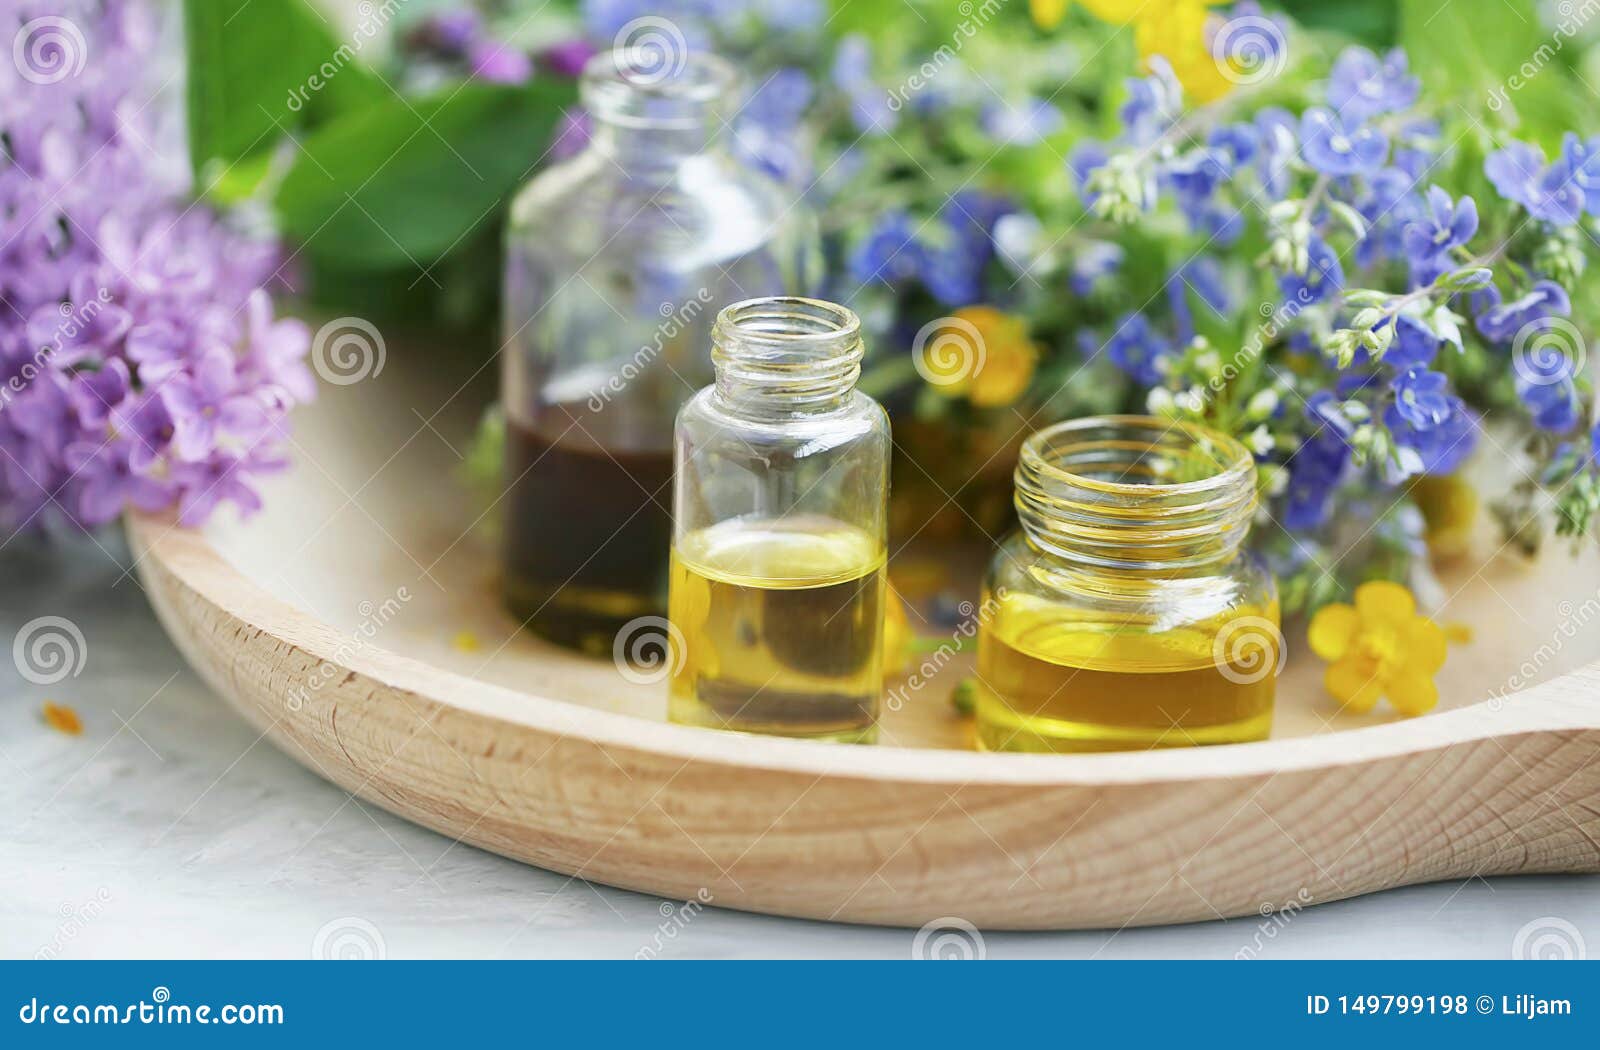 aromatherapy. natural medicinal plants and herbs oil bottles, natural floral extracts and oils, natural oils